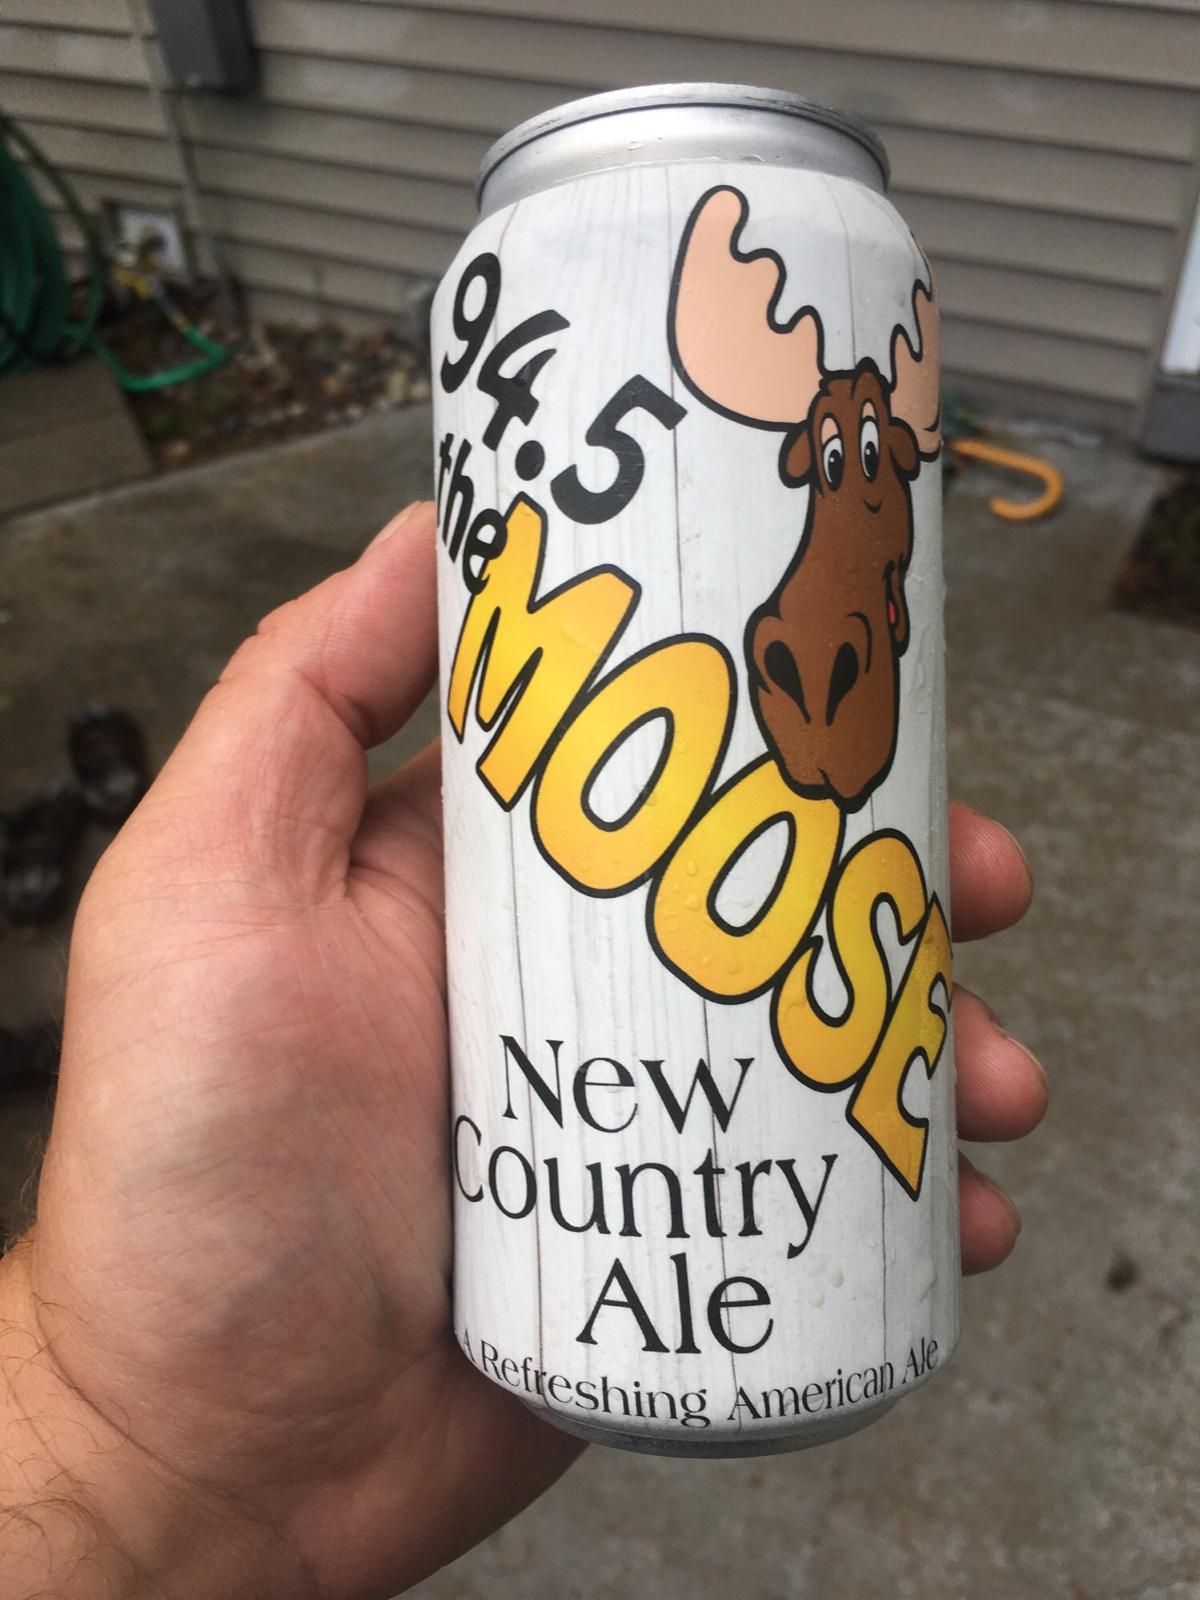 94.5 The Moose New Country Ale